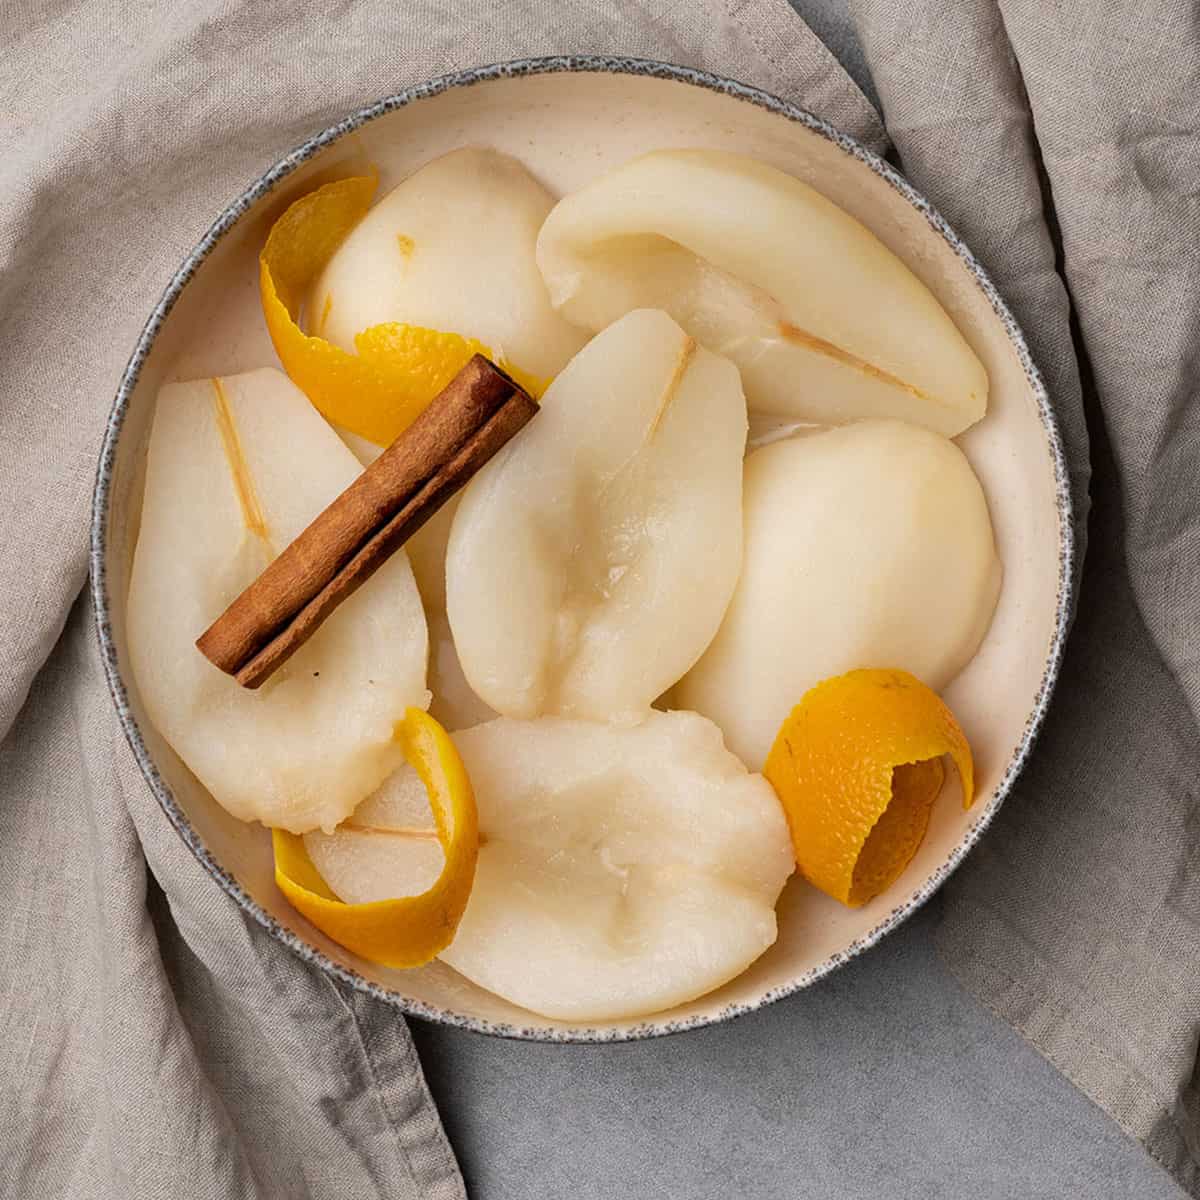 <p>Slowly simmered in a sweet syrup infused with cinnamon, cloves, and orange peel, these easy <strong><a href="https://www.spatuladesserts.com/poached-pears/">Poached Pears</a></strong> are the perfect elegant but simple dessert for your next gathering! </p> <p><strong>Go to the recipe:</strong> <strong><a href="https://www.spatuladesserts.com/poached-pears/">Poached Pears</a></strong></p>